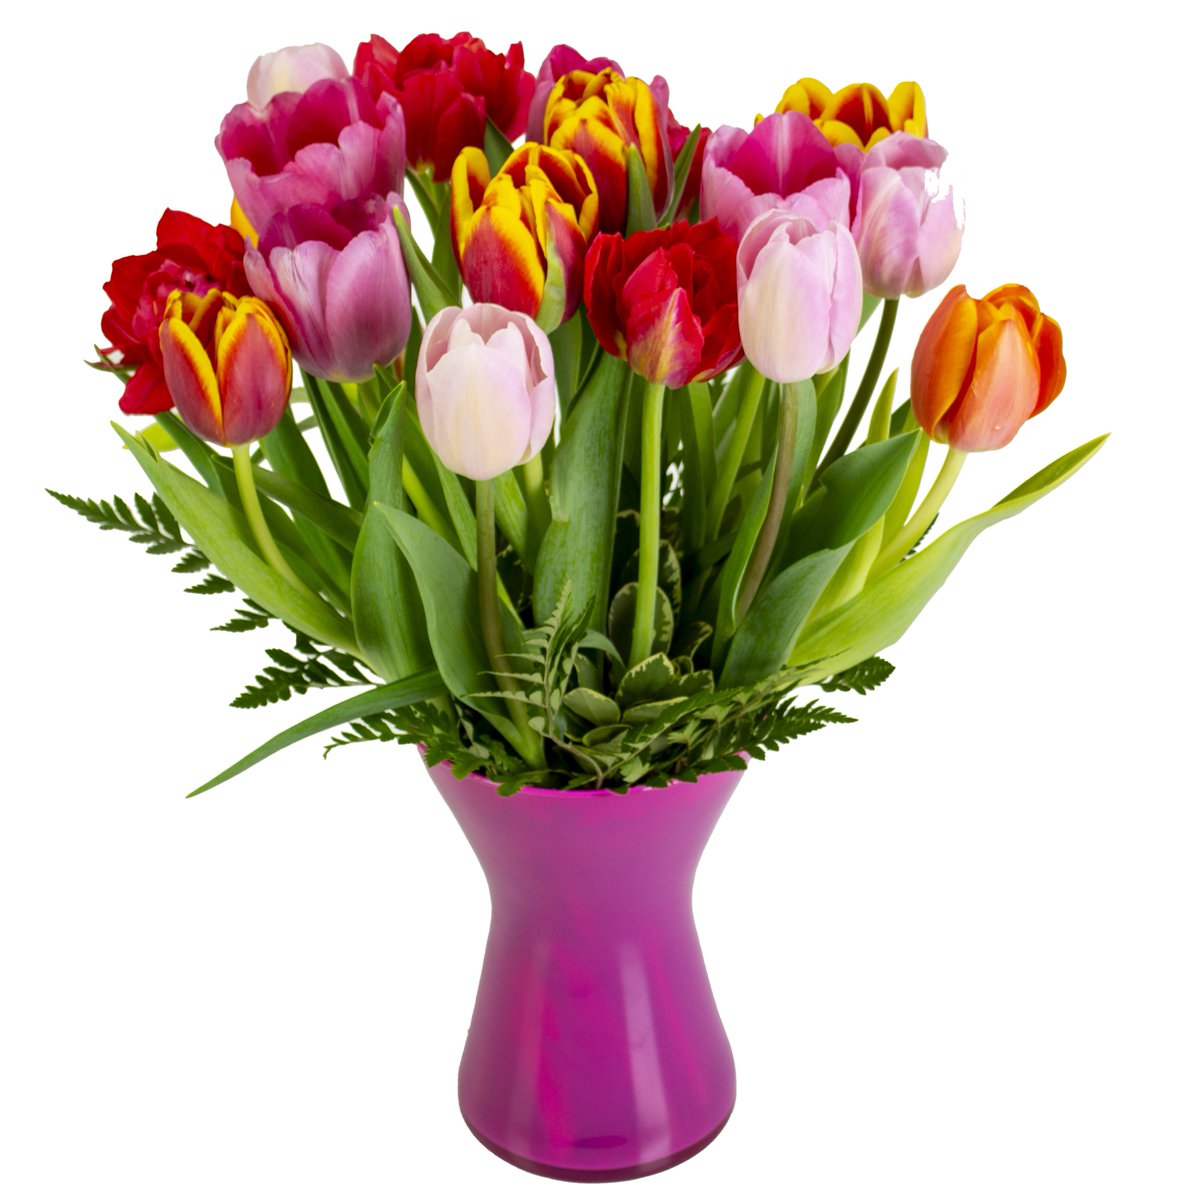 Today kicks off National Nurses Week and Teacher Appreciation Week! ❤️ Order flowers for a special teacher or nurse in your life at karinsflorist.com or by calling 703-281-4141. #florist #TeacherAppreciationWeek2024 #NationalNursesWeek #tulips